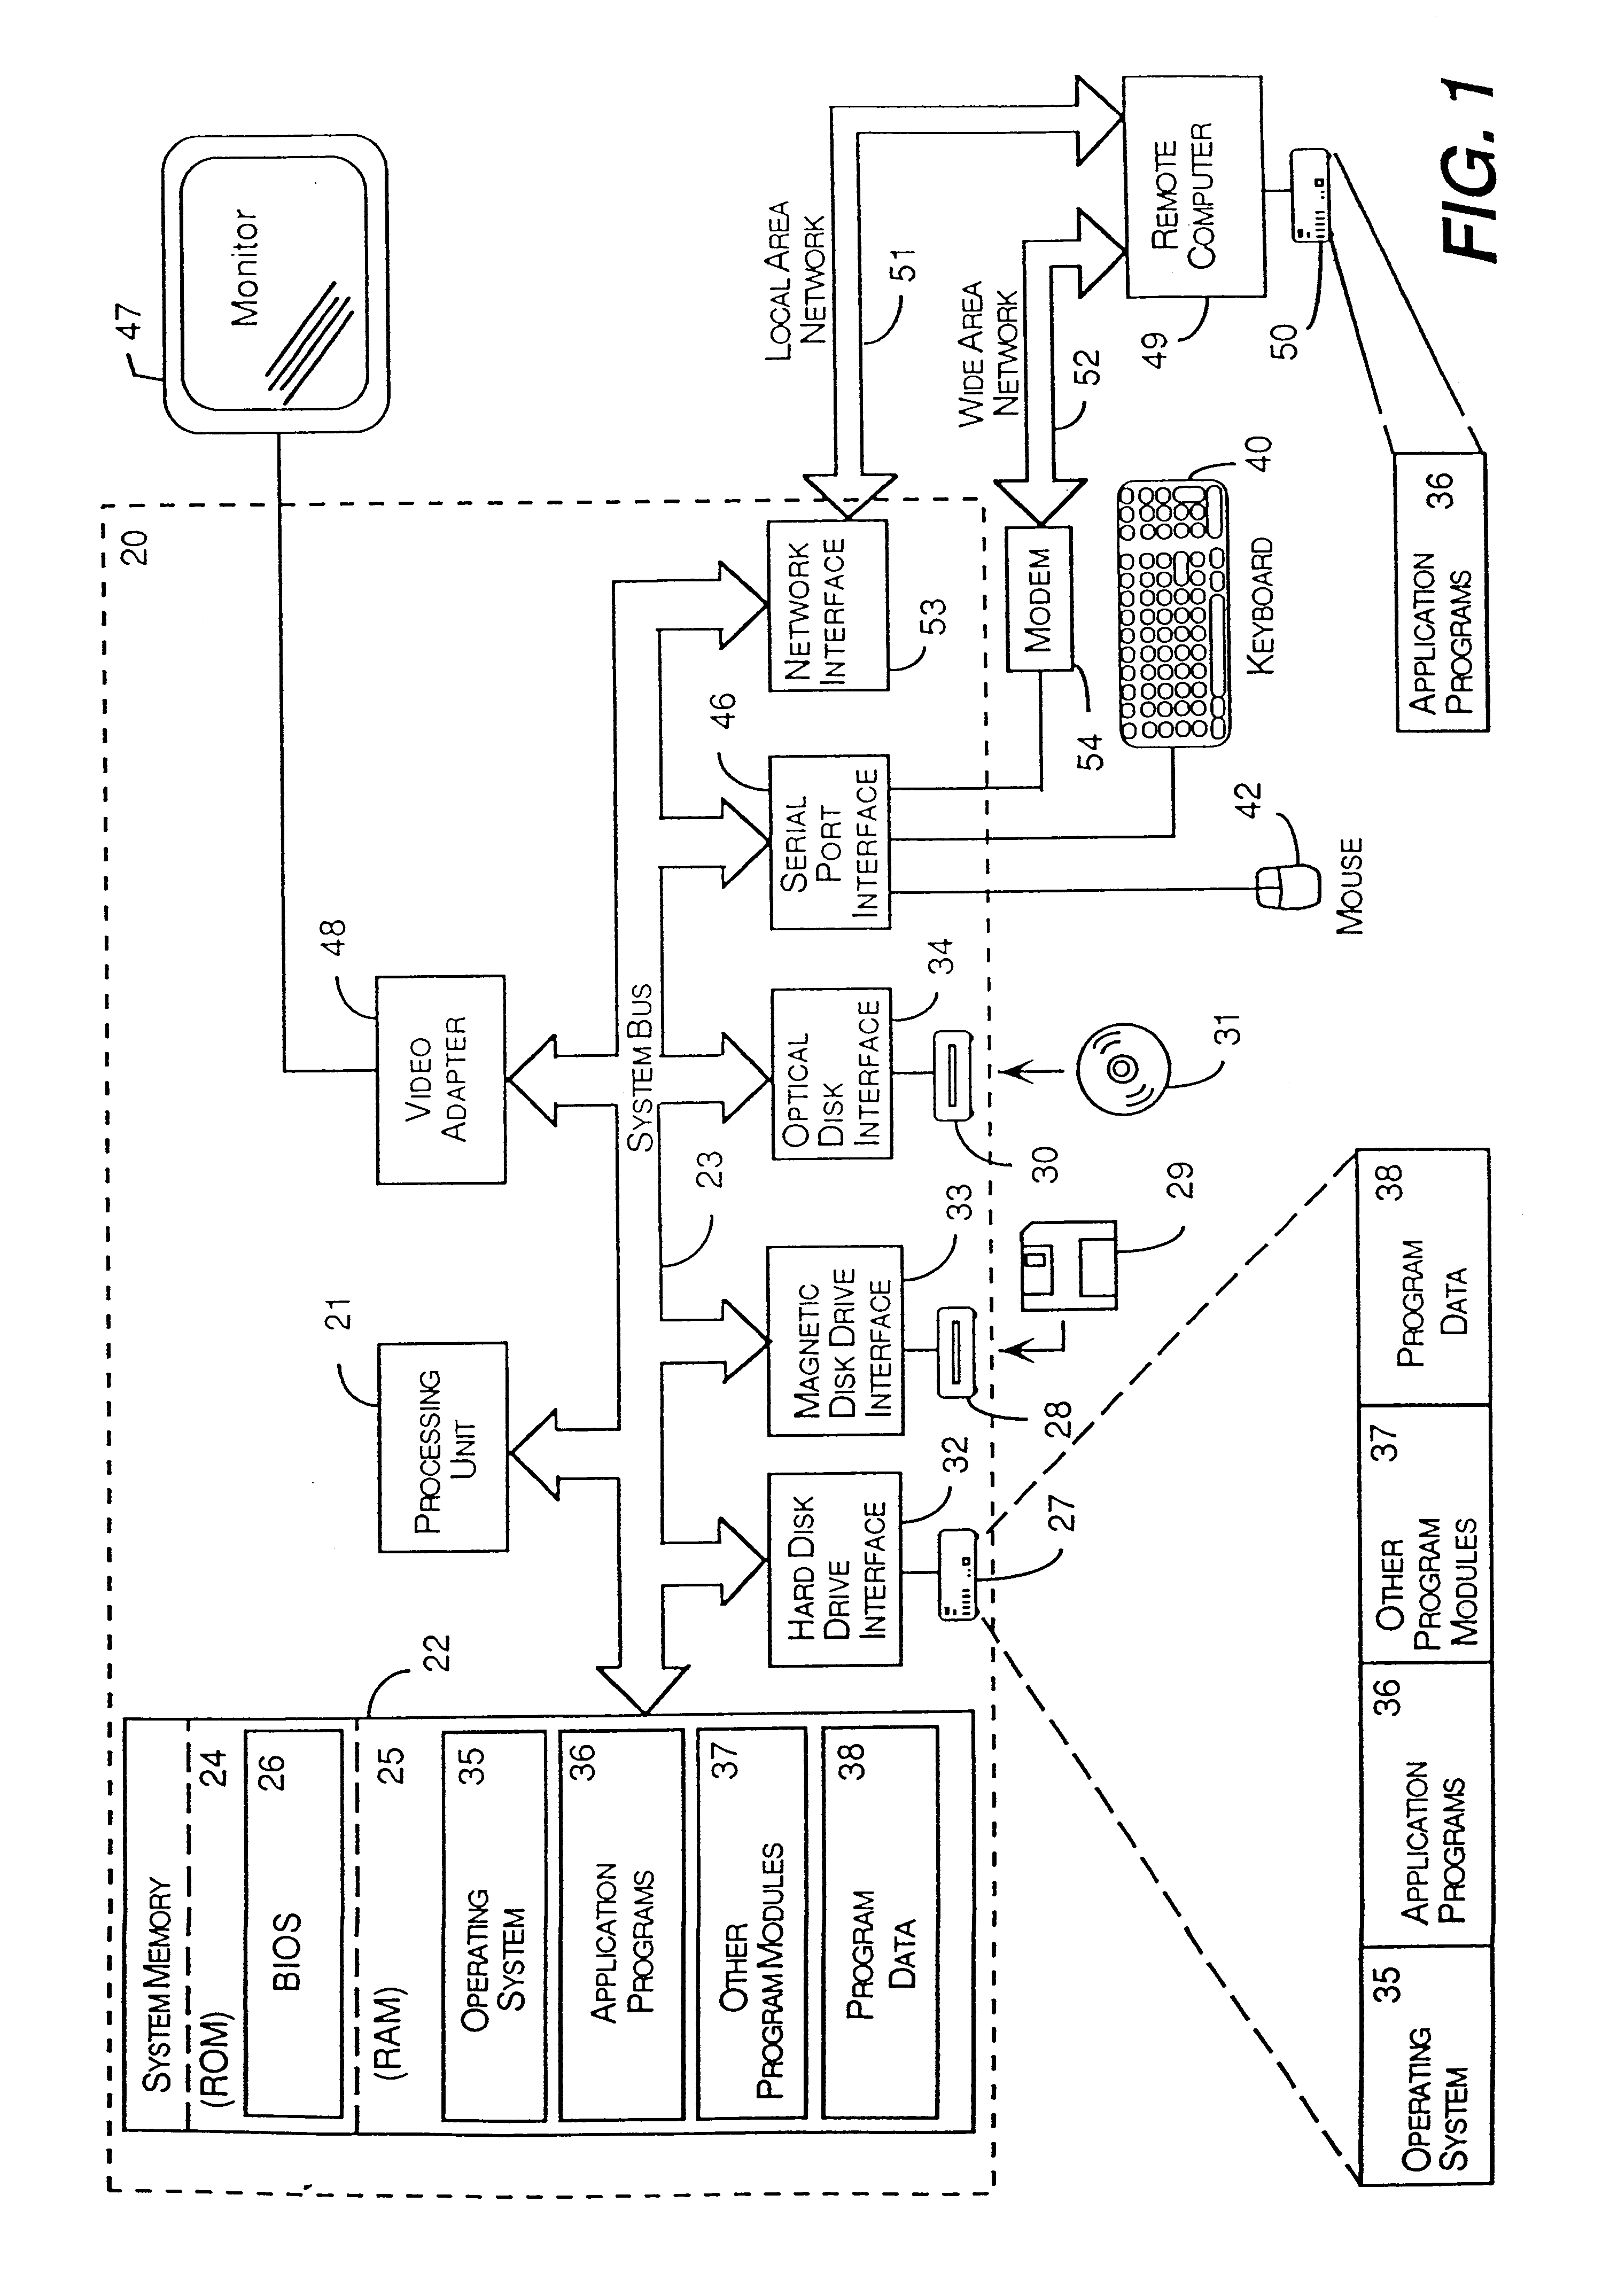 Method for preventing software piracy during installation from a read only storage medium